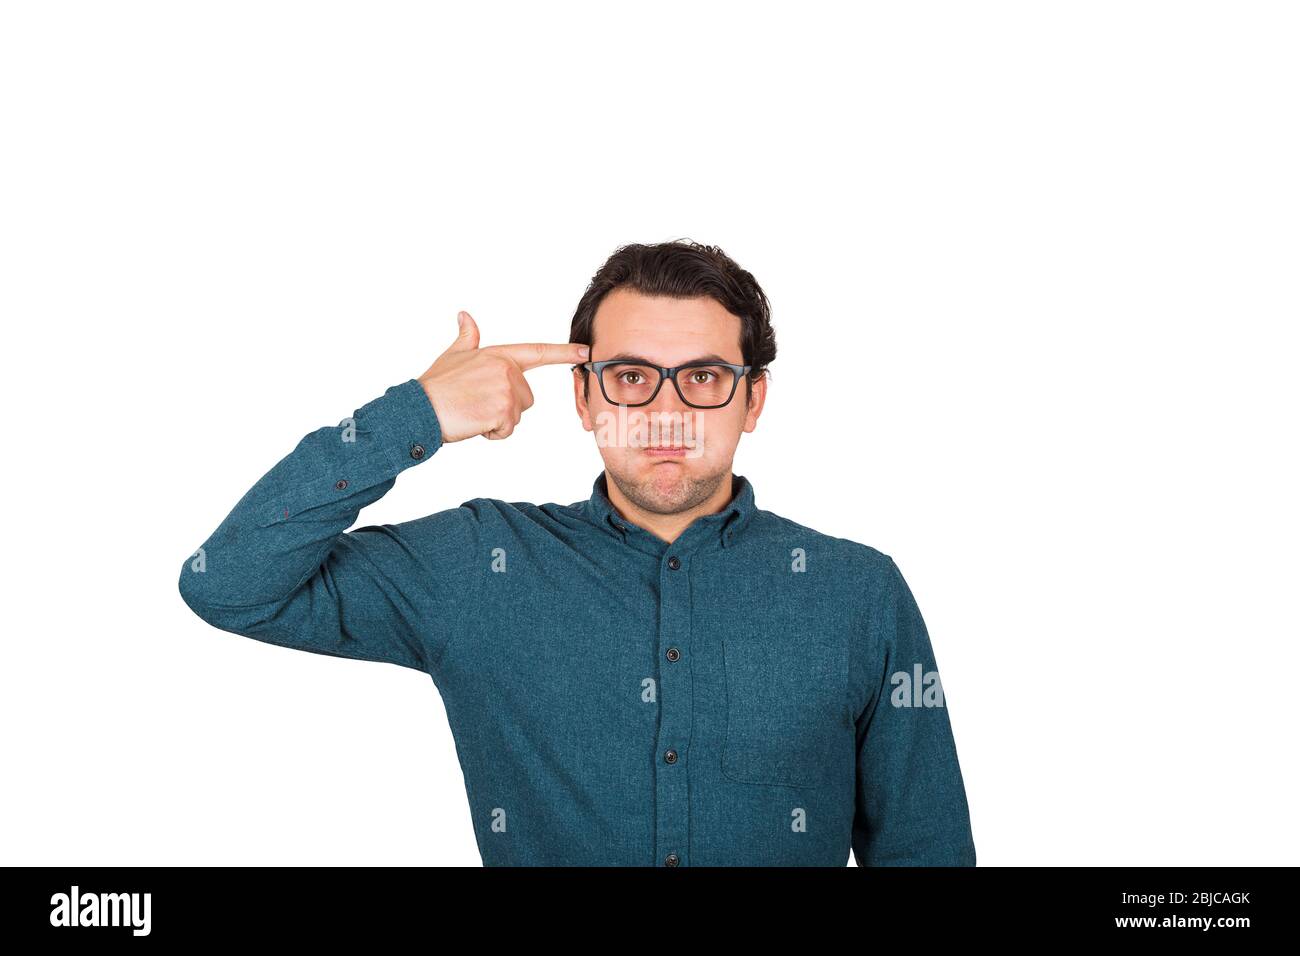 Annoyed businessman headshot himself. Keeps hand to his temple, as gun gesture, punching his head being frustrated. Head shot, displeased face emotion Stock Photo